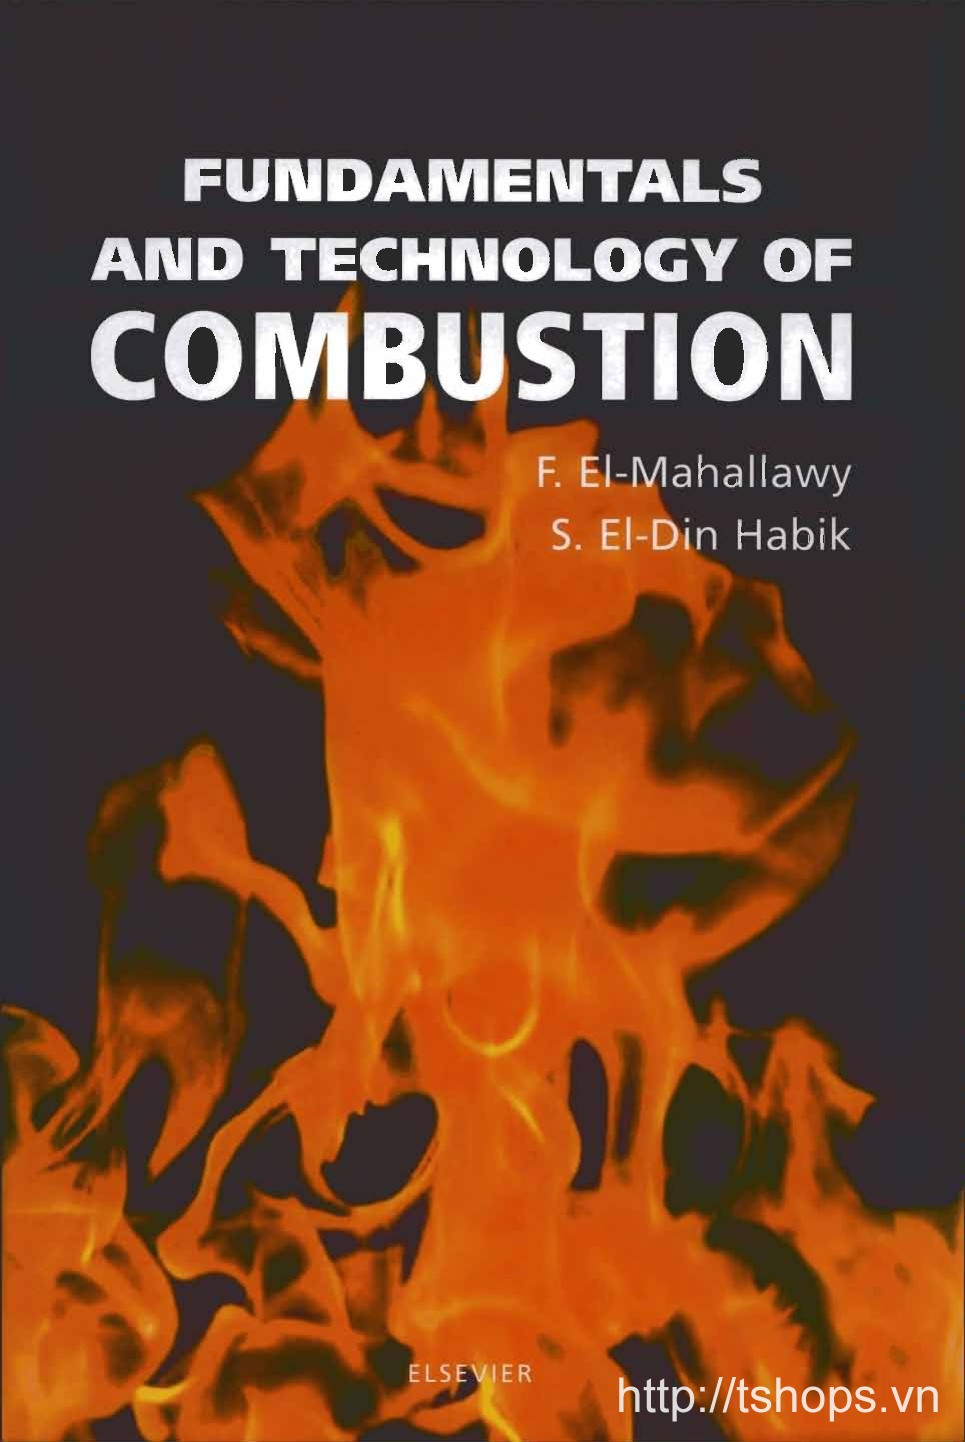 Fundamentals and Technology of Combustion